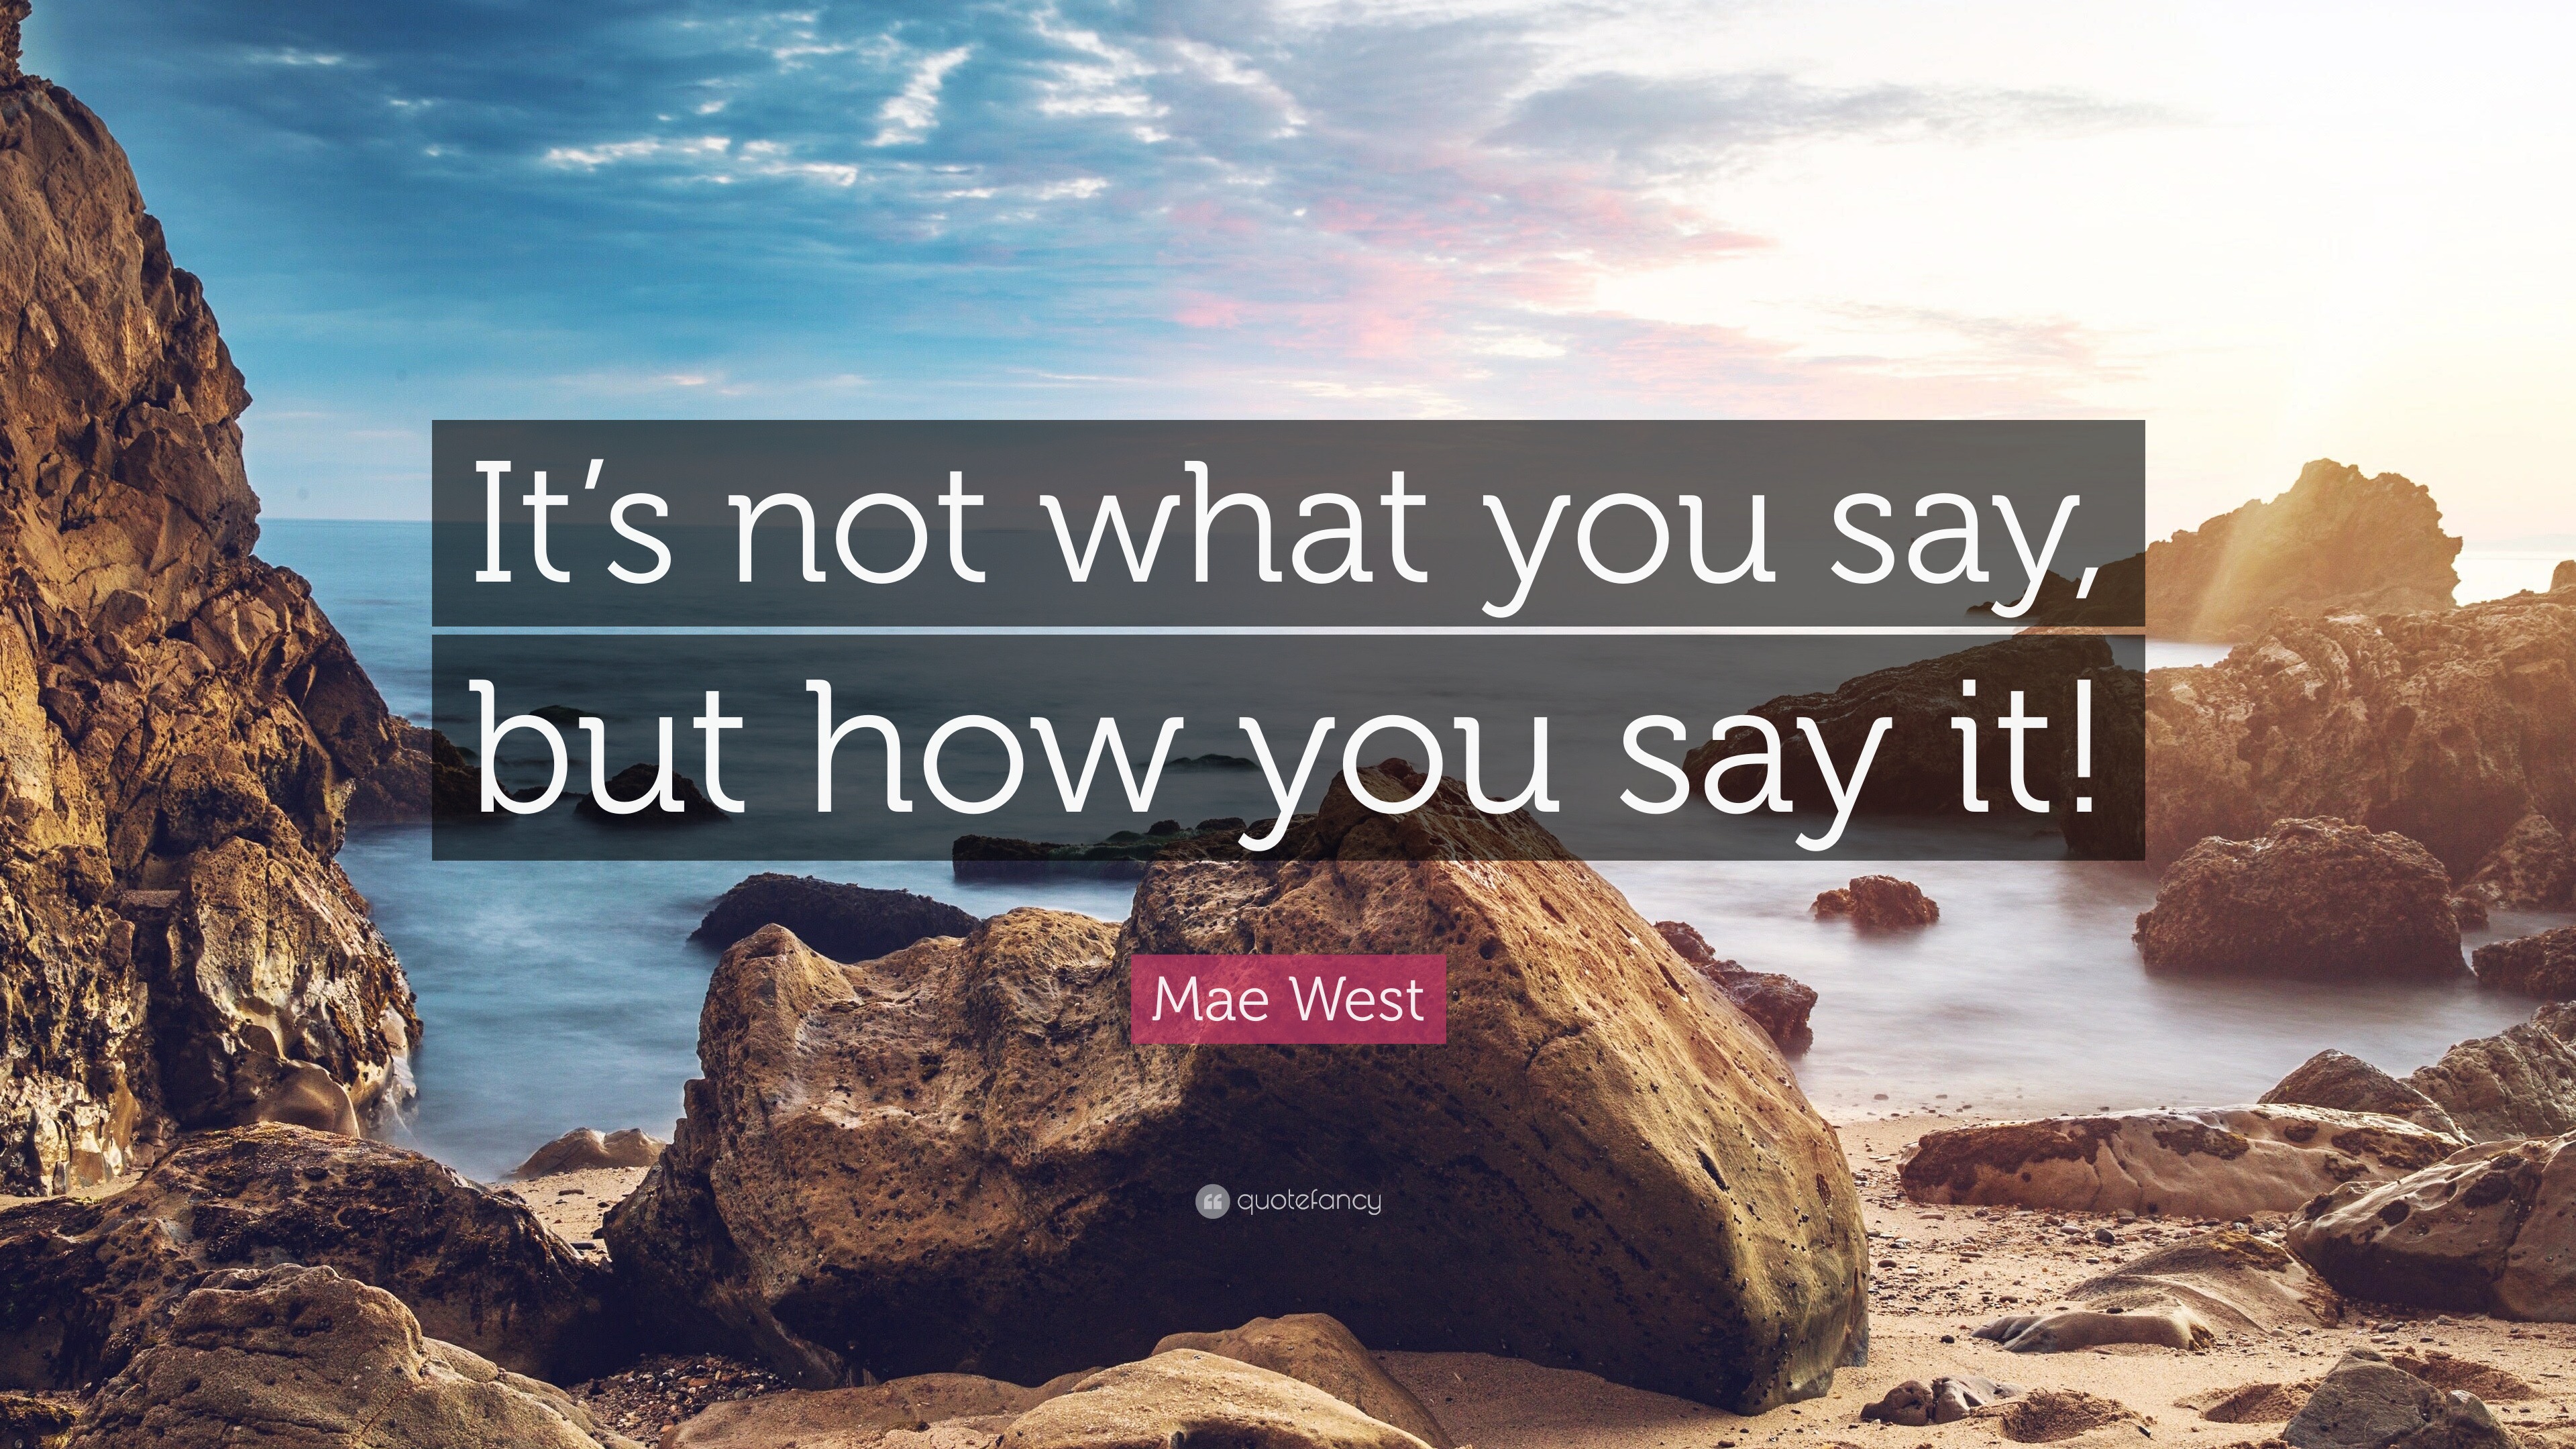 Mae West Quote: “It's not what you say, but how you say it!”